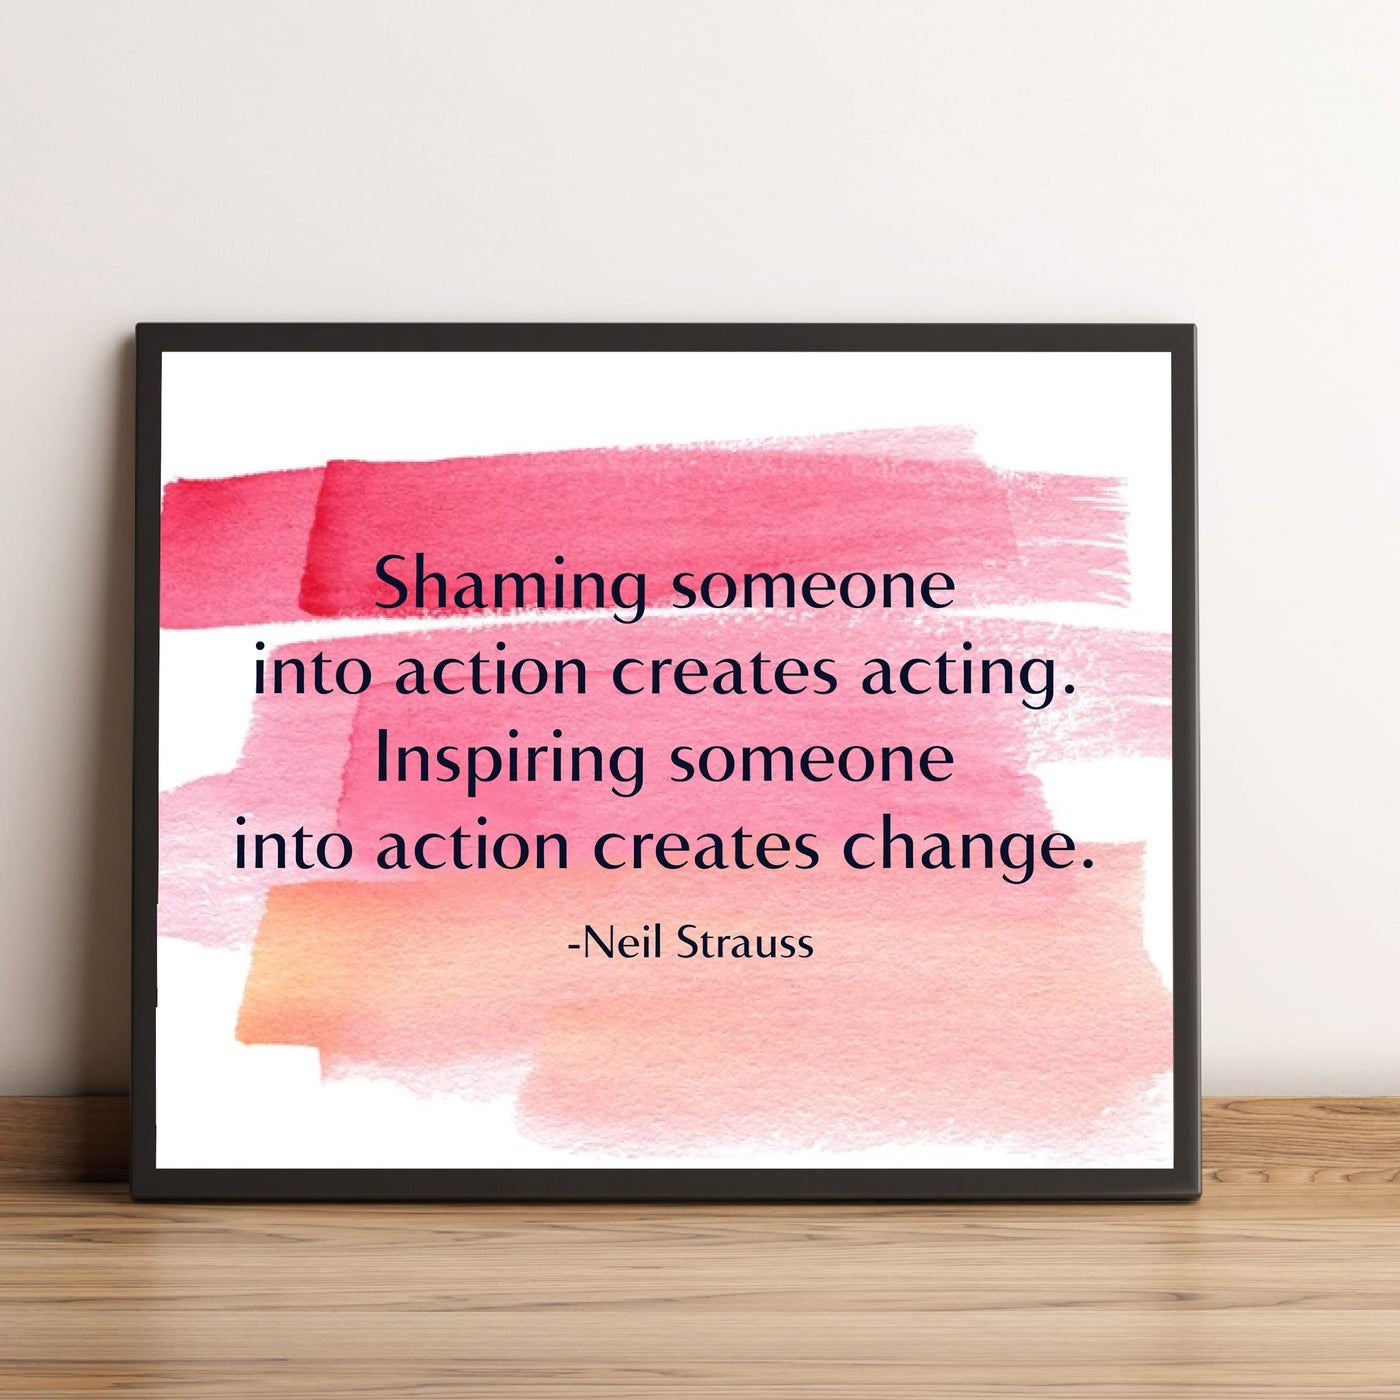 Inspiring Someone Into Action Creates Change Motivational Quotes Wall Decor -10 x 8" Inspirational Replica Watercolor Art Print-Ready to Frame. Modern Home-Office-Desk-School-Motivation Decor!